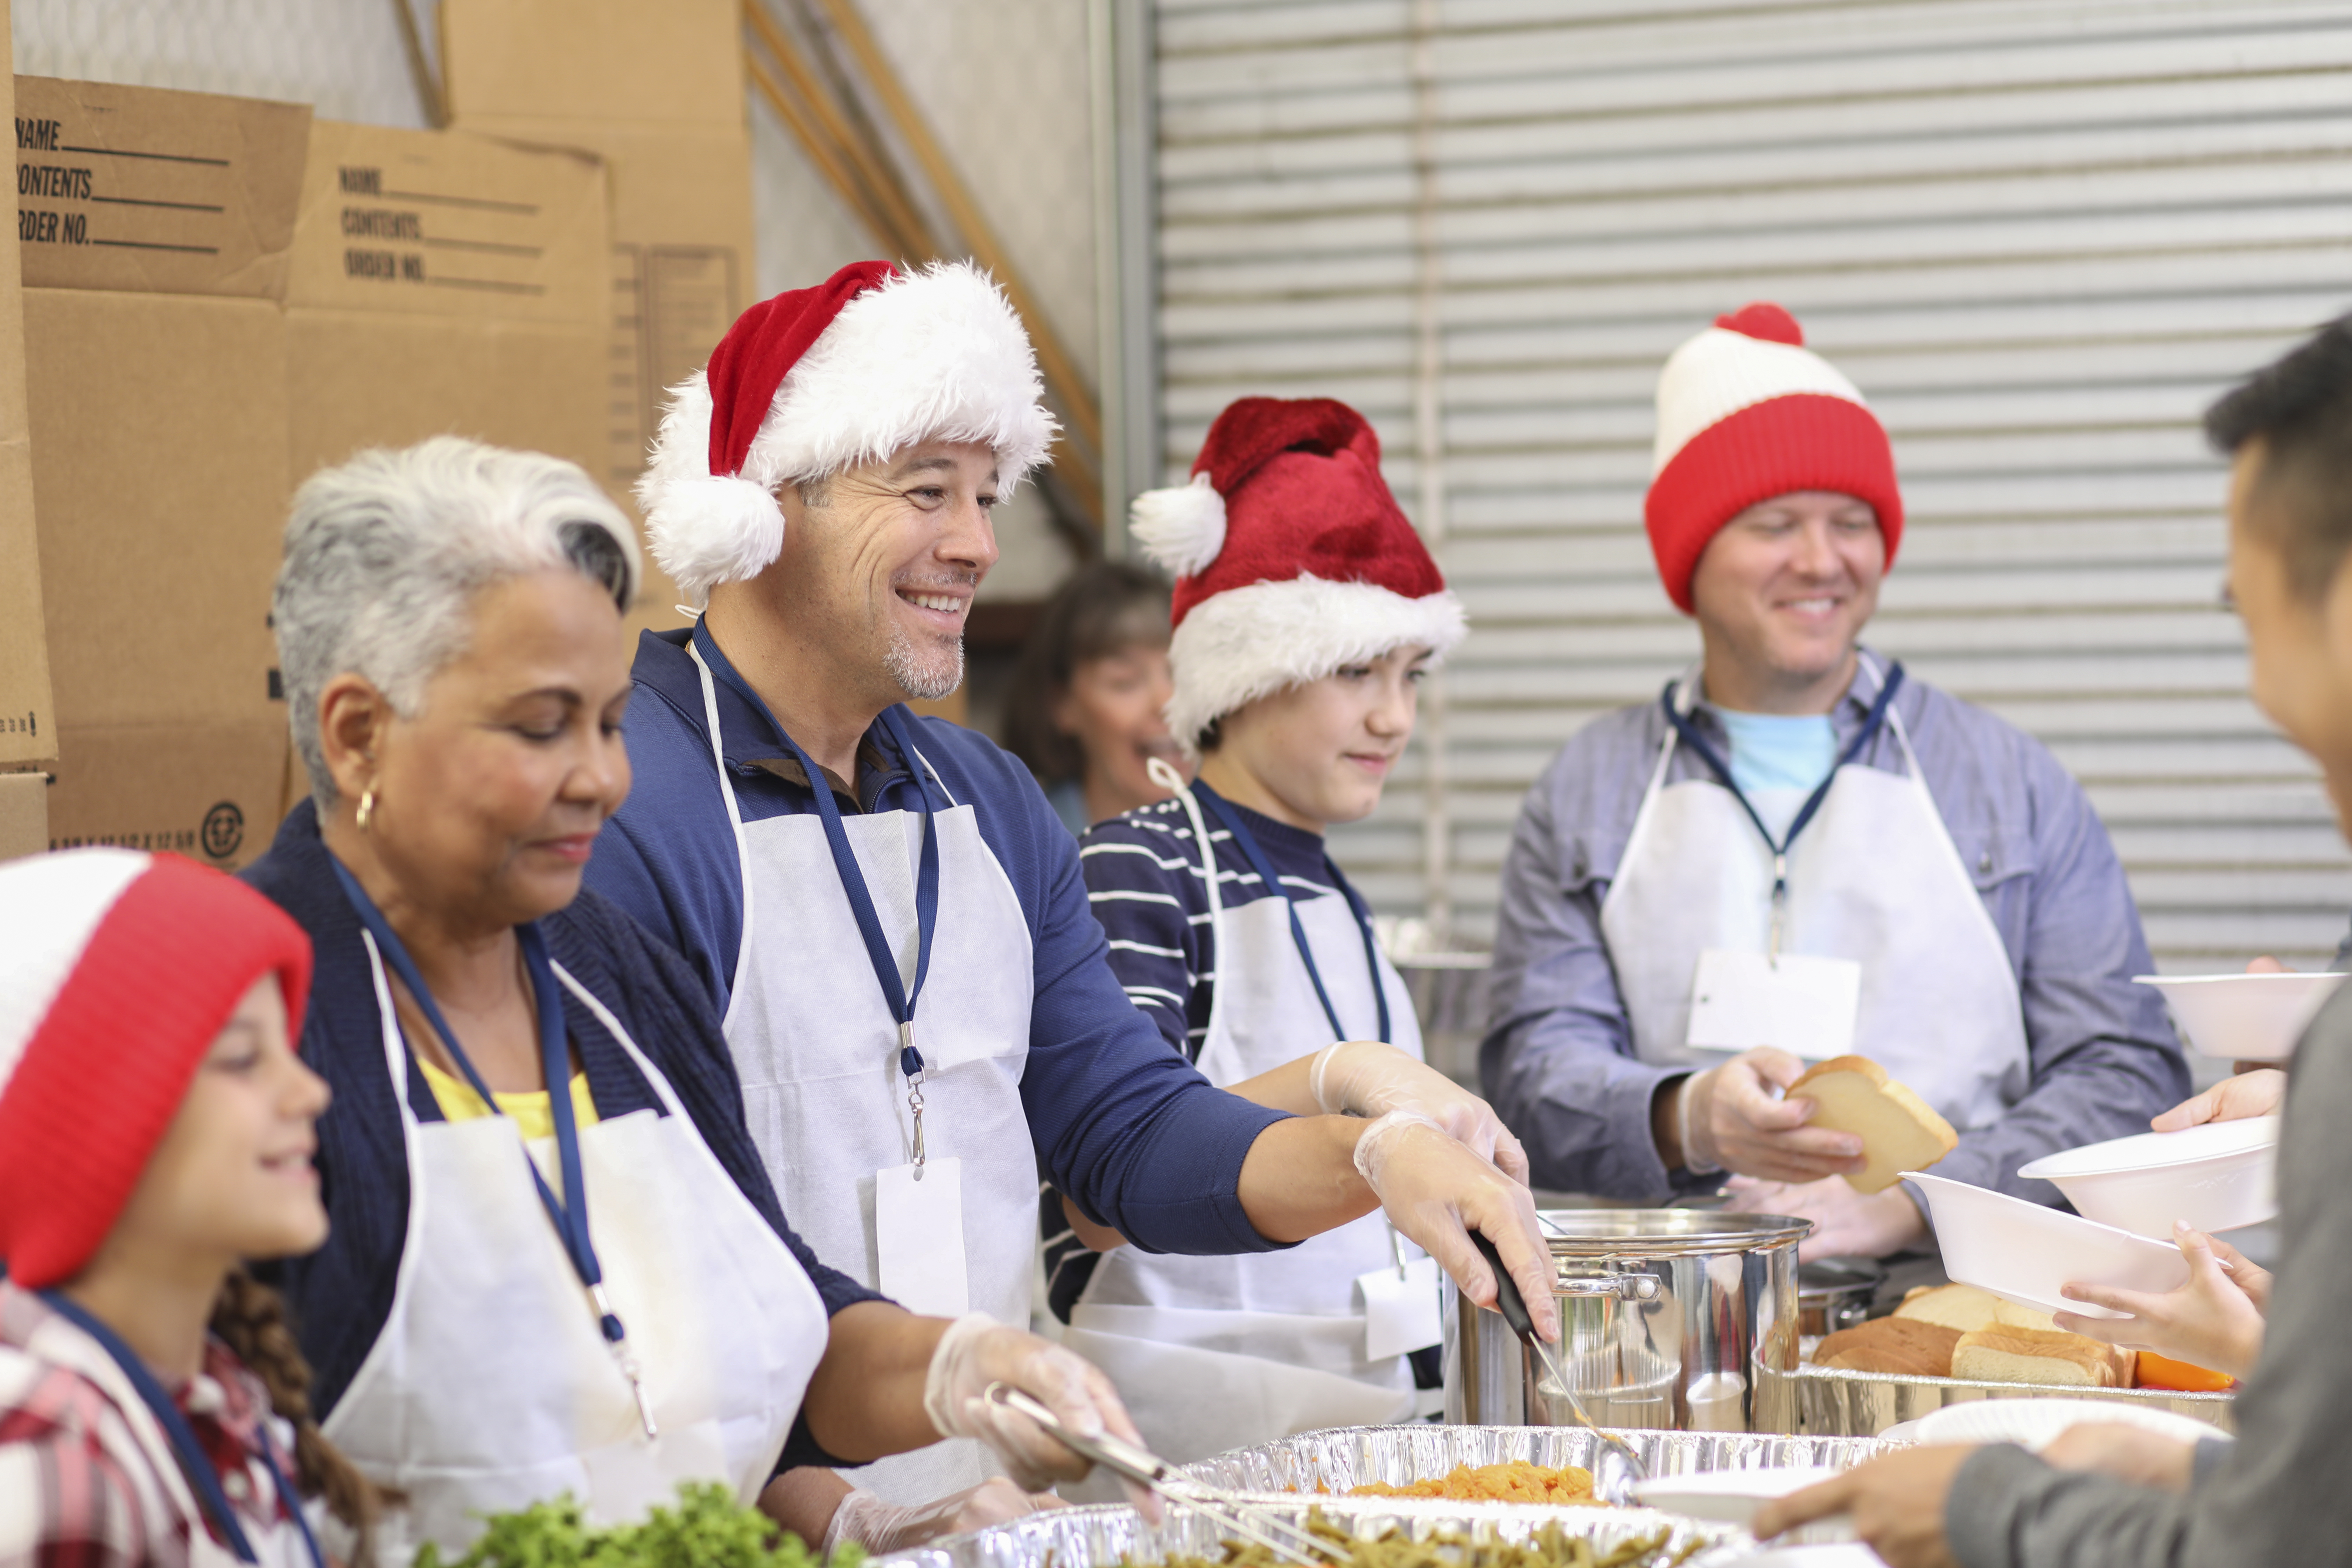 Multi Ethnic Volunteers Serves Food At Soup Kitchen At Christmas